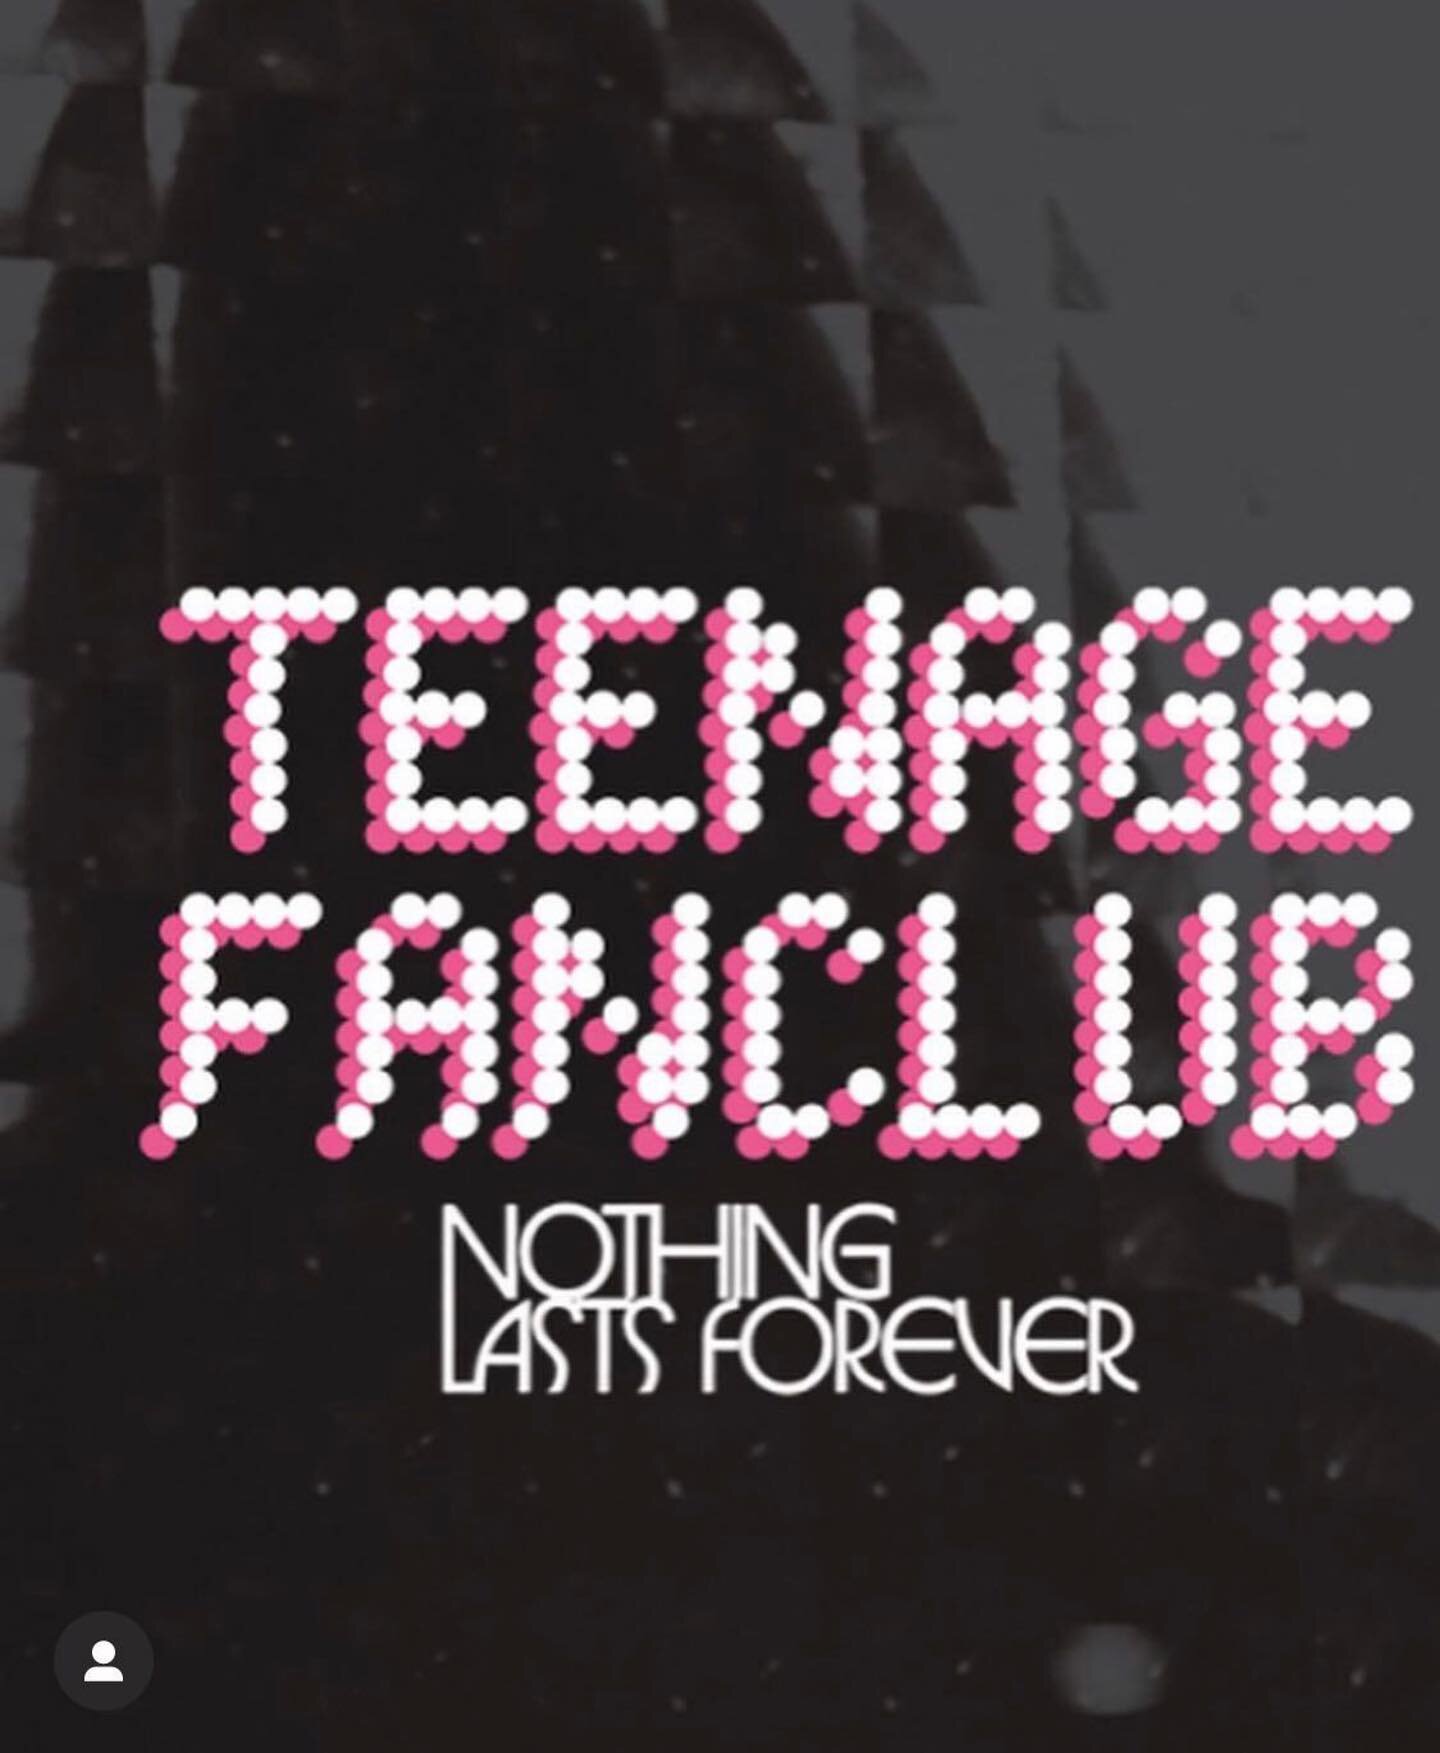 💗🖤💗
@teenagefanclubofficial NEW ALBUM &ldquo;NOTHING LASTS FOREVER&rdquo; OUT NOW!

There&rsquo;s no disguising the band&rsquo;s pleasure at having this album out there!

Available to buy now, here =&gt; lnk.to/TFNLF

Or wherever you get your musi